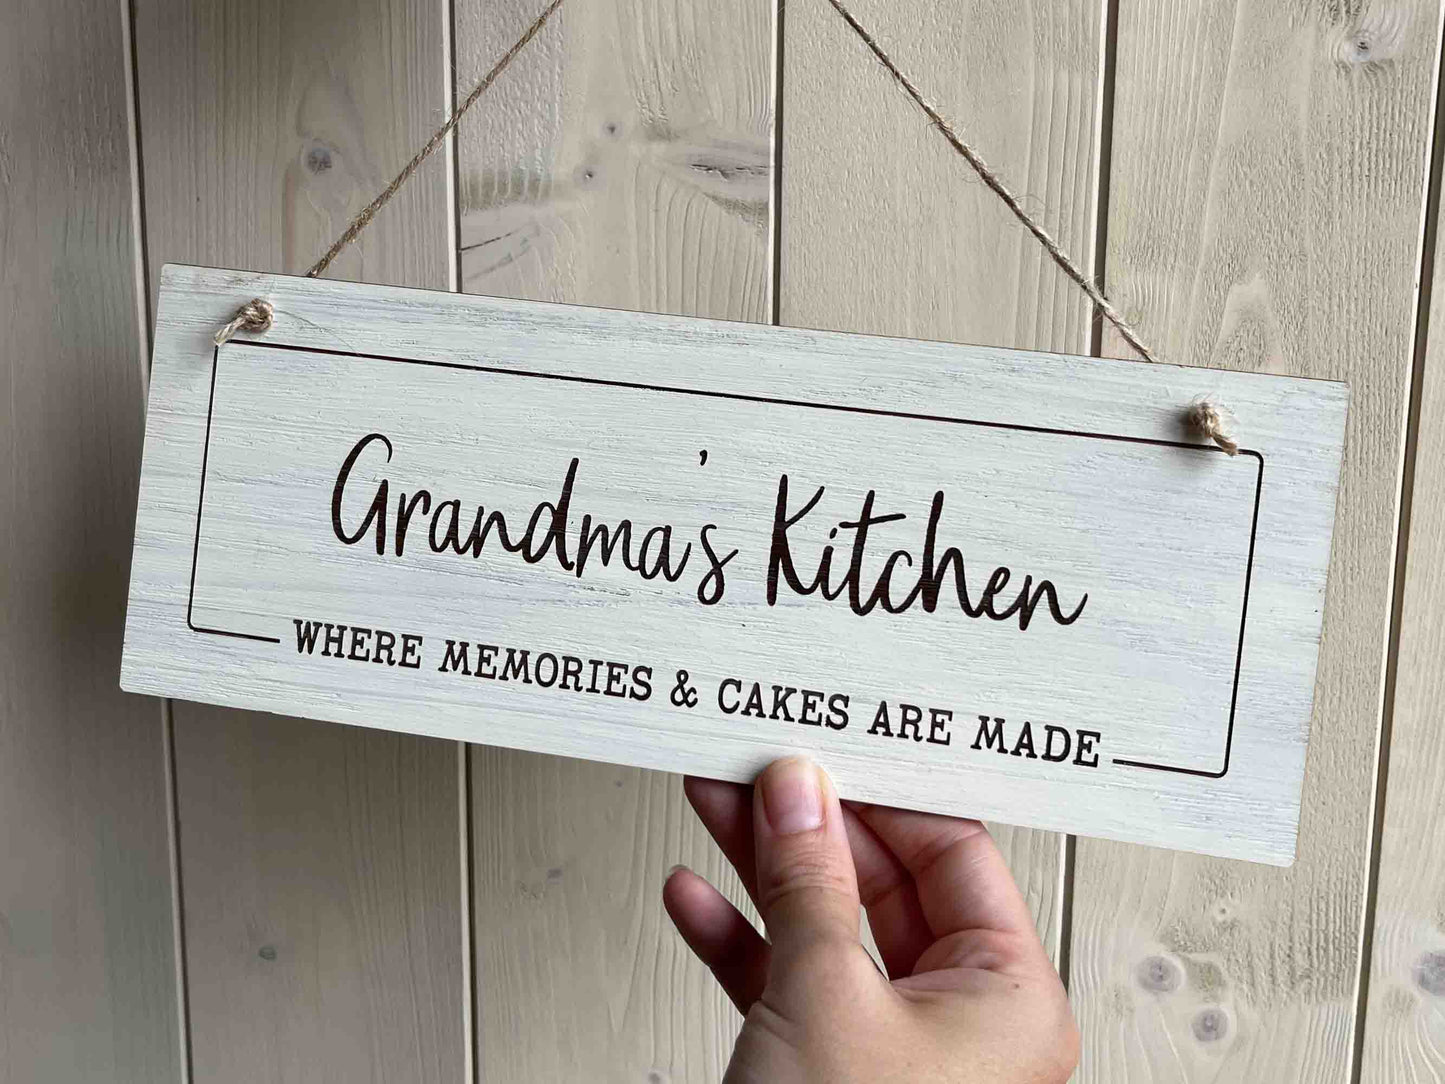 A Perfect Gift - Surprise someone special with a personalised wooden sign for their favourite space